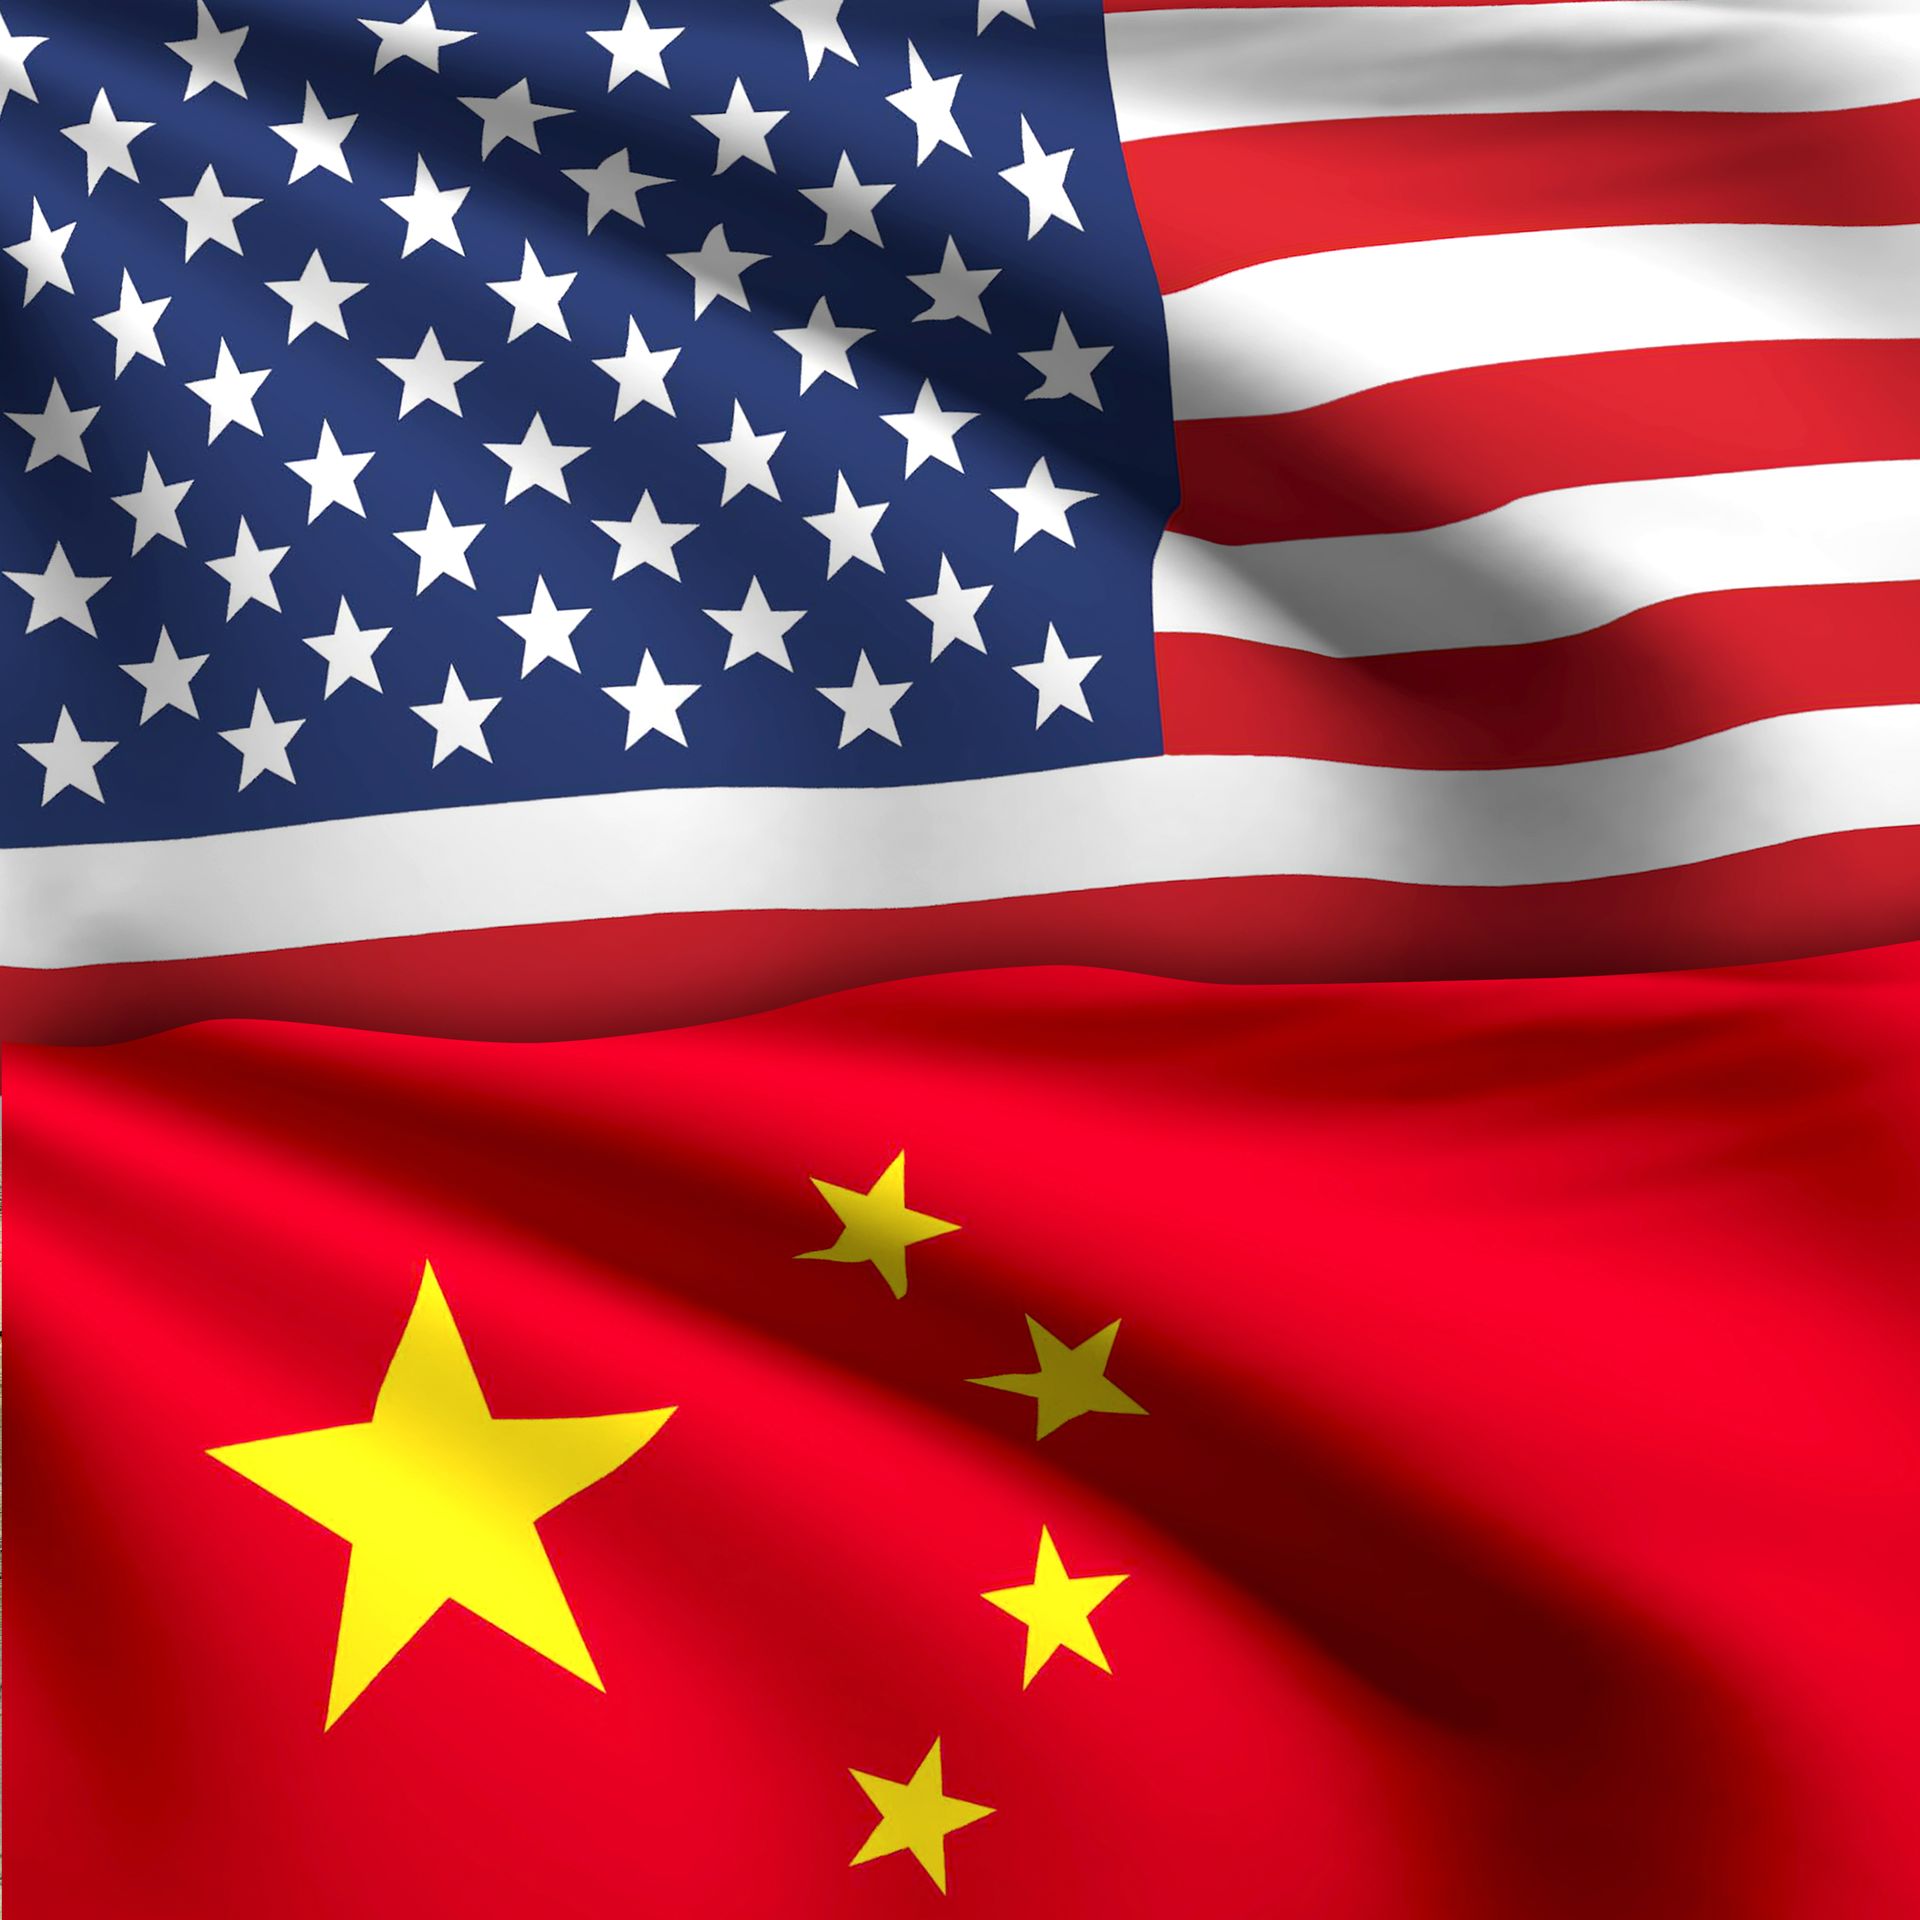 The Chinese and American flags